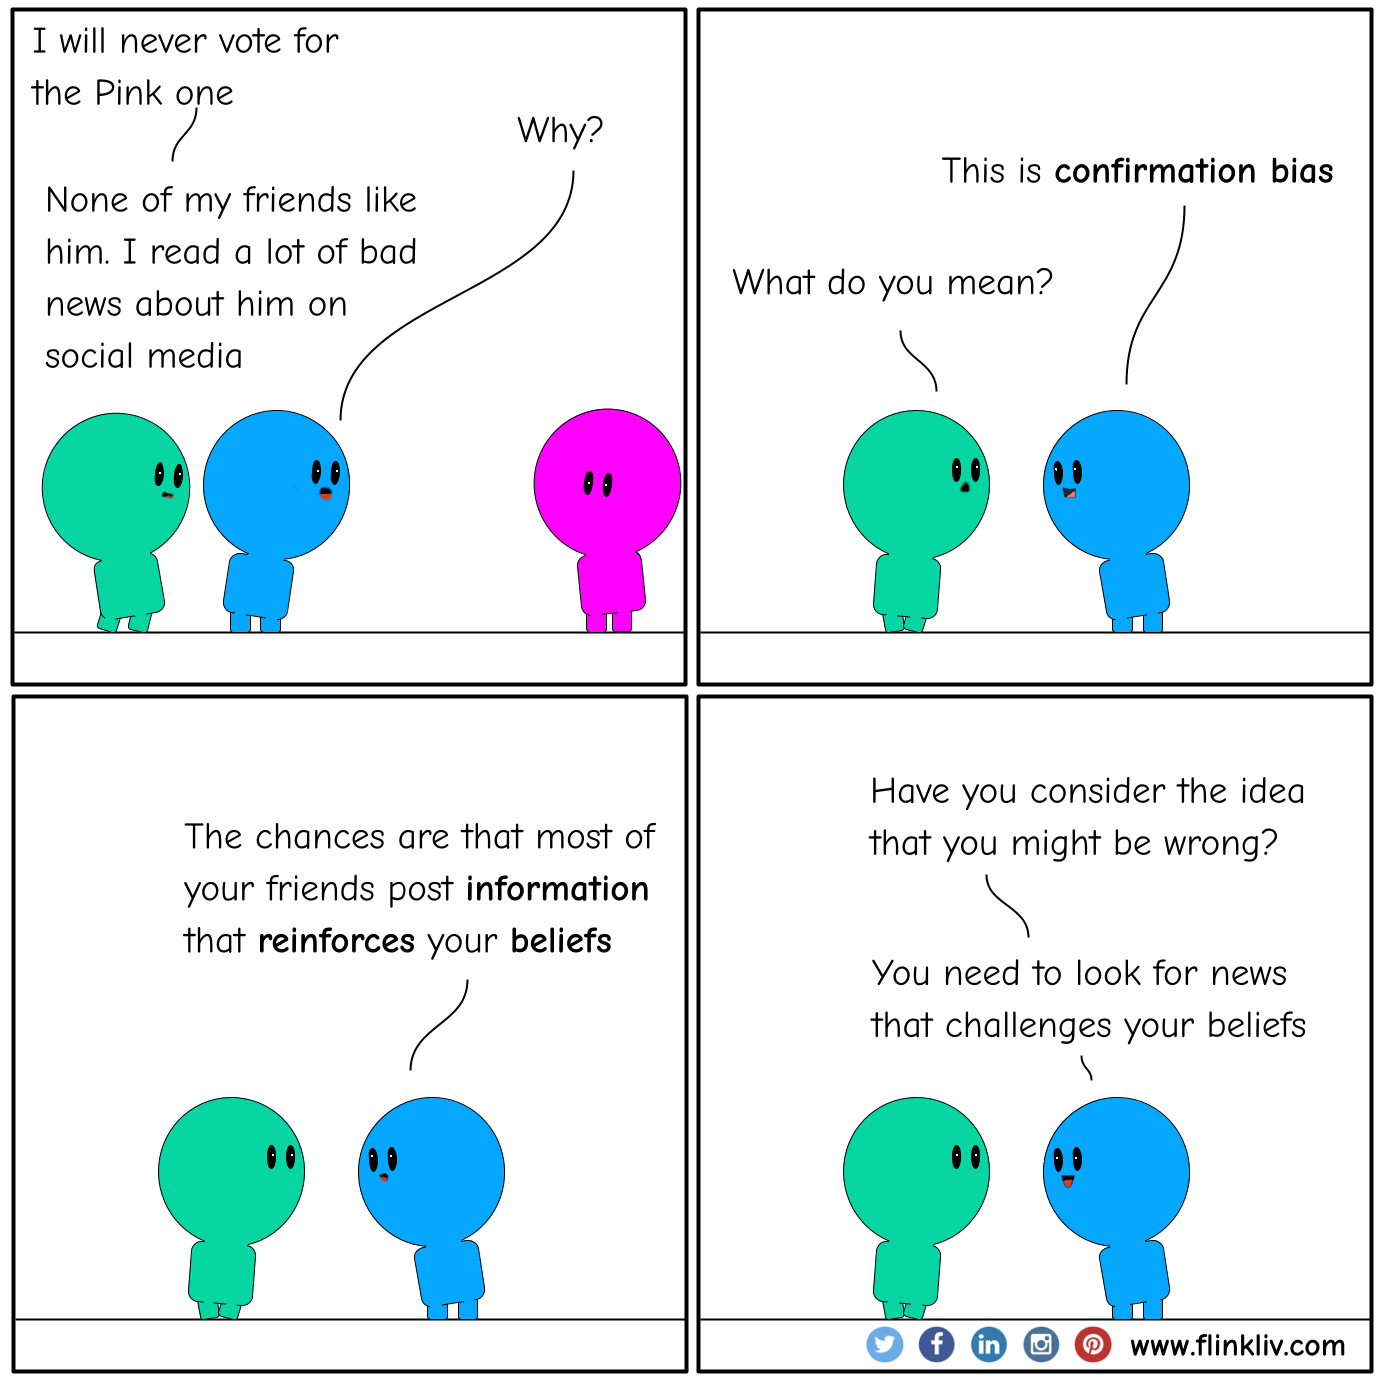 Conversation between A and B about confirmation bias. 
              A: I will never vote for the Pink one
              B: Why?
              A: None of my friends like him. I read a lot of bad news about him on social media
              B: This is confirmation bias.
              A: What do you mean?
              B: The chances are that most of your friends post information that reinforces your beliefs B: Have you consider the idea that you might be wrong?
              B: You need to look for news that challenges your beliefs.
			By flinkliv.com
              